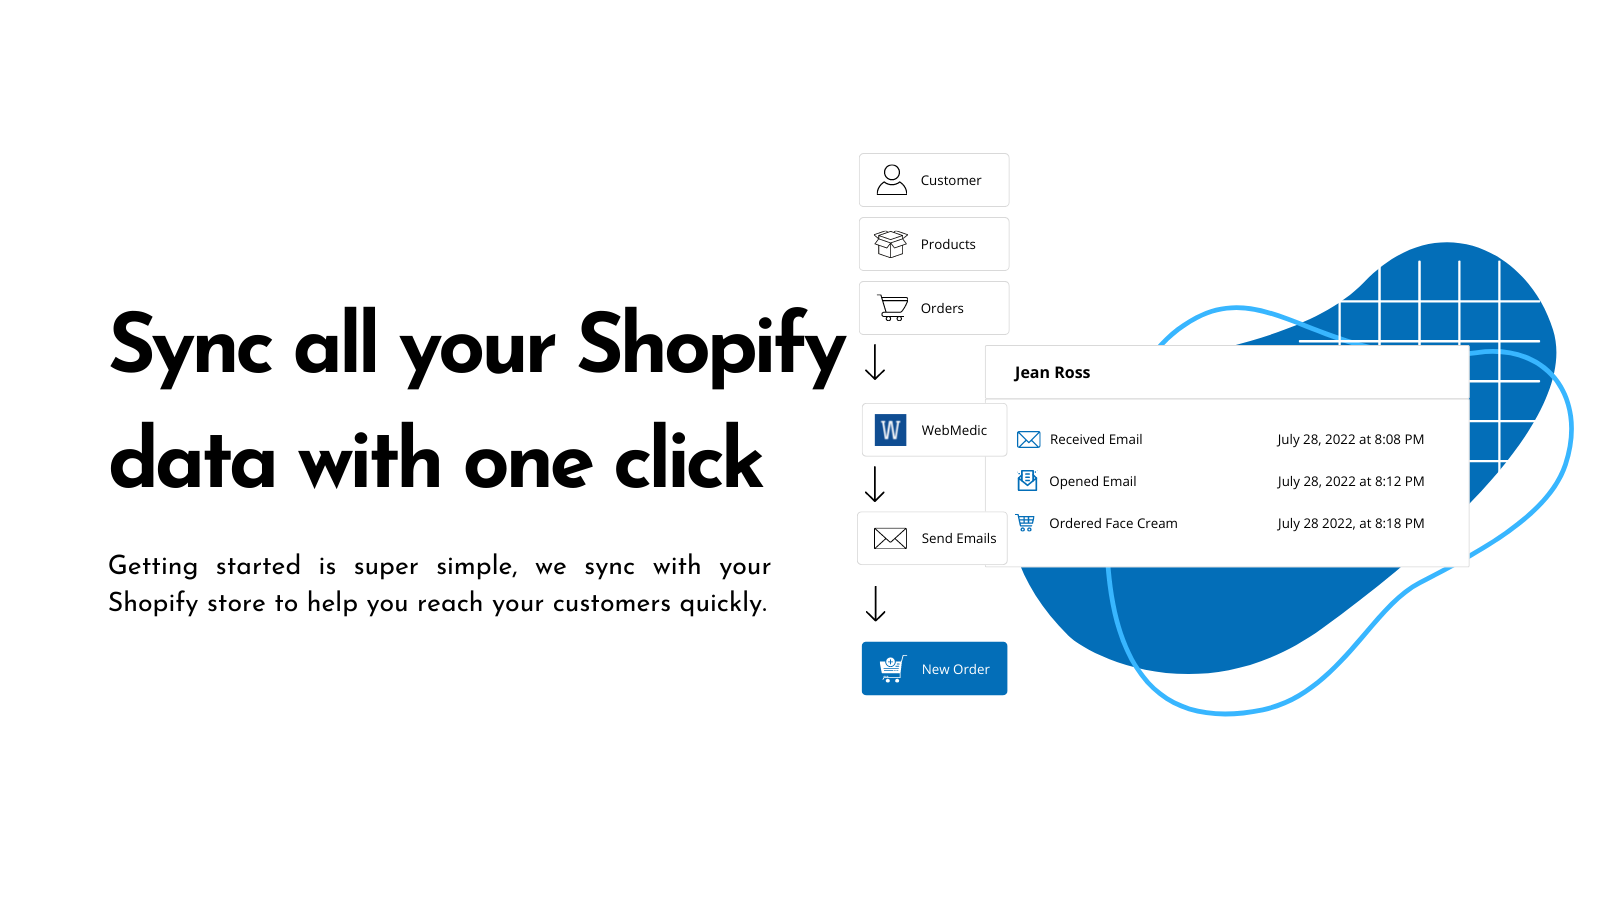 Sync your Shopify with one click